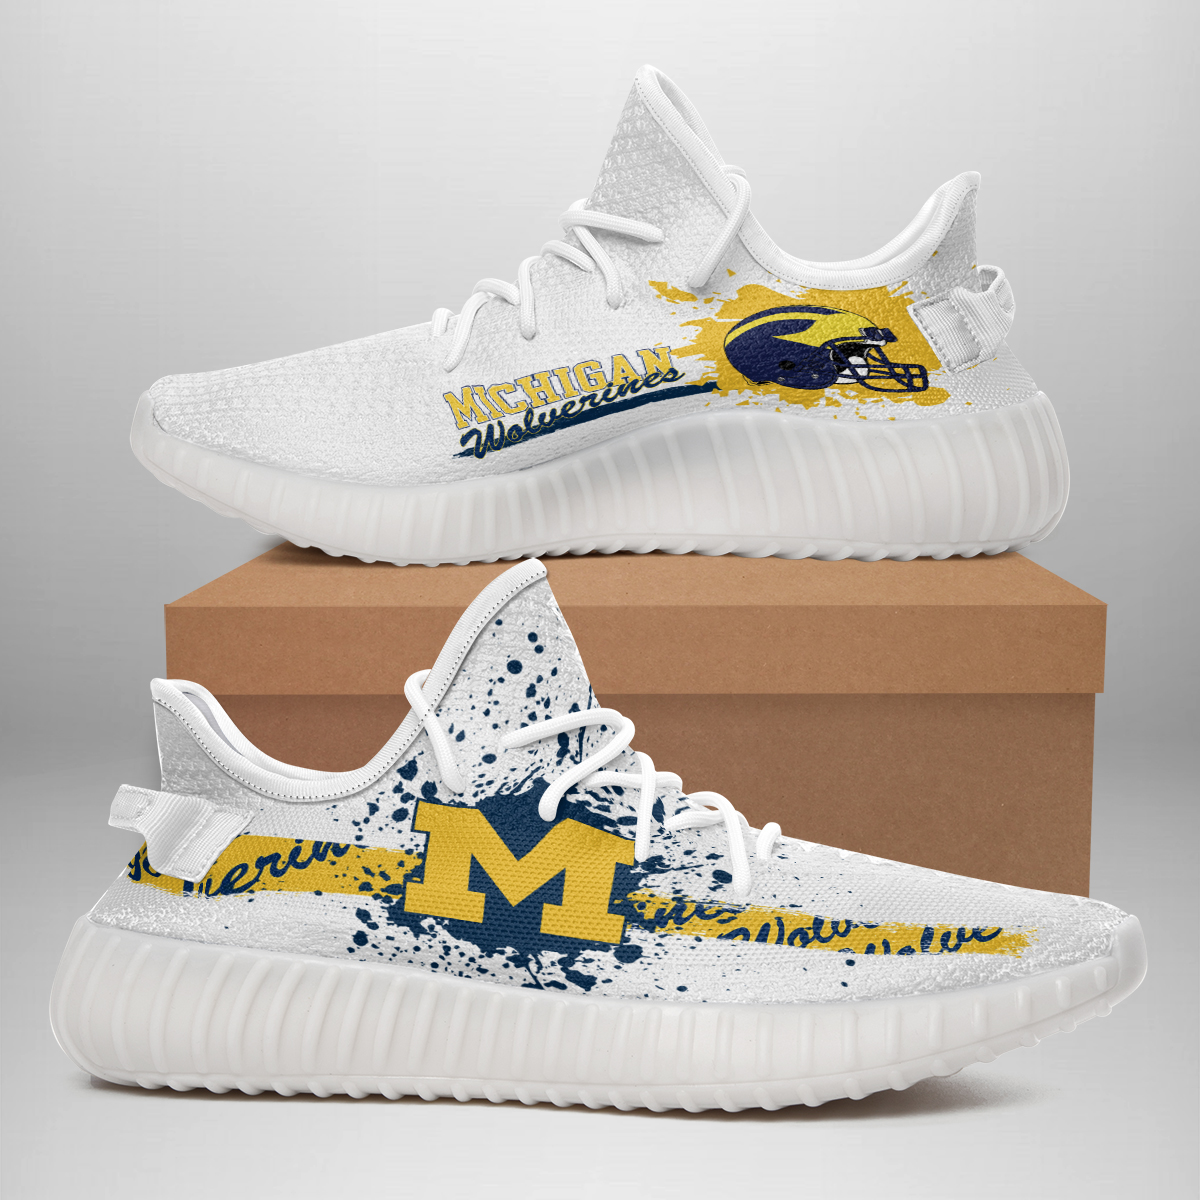 Michigan Wolverines Yeezy Shoes